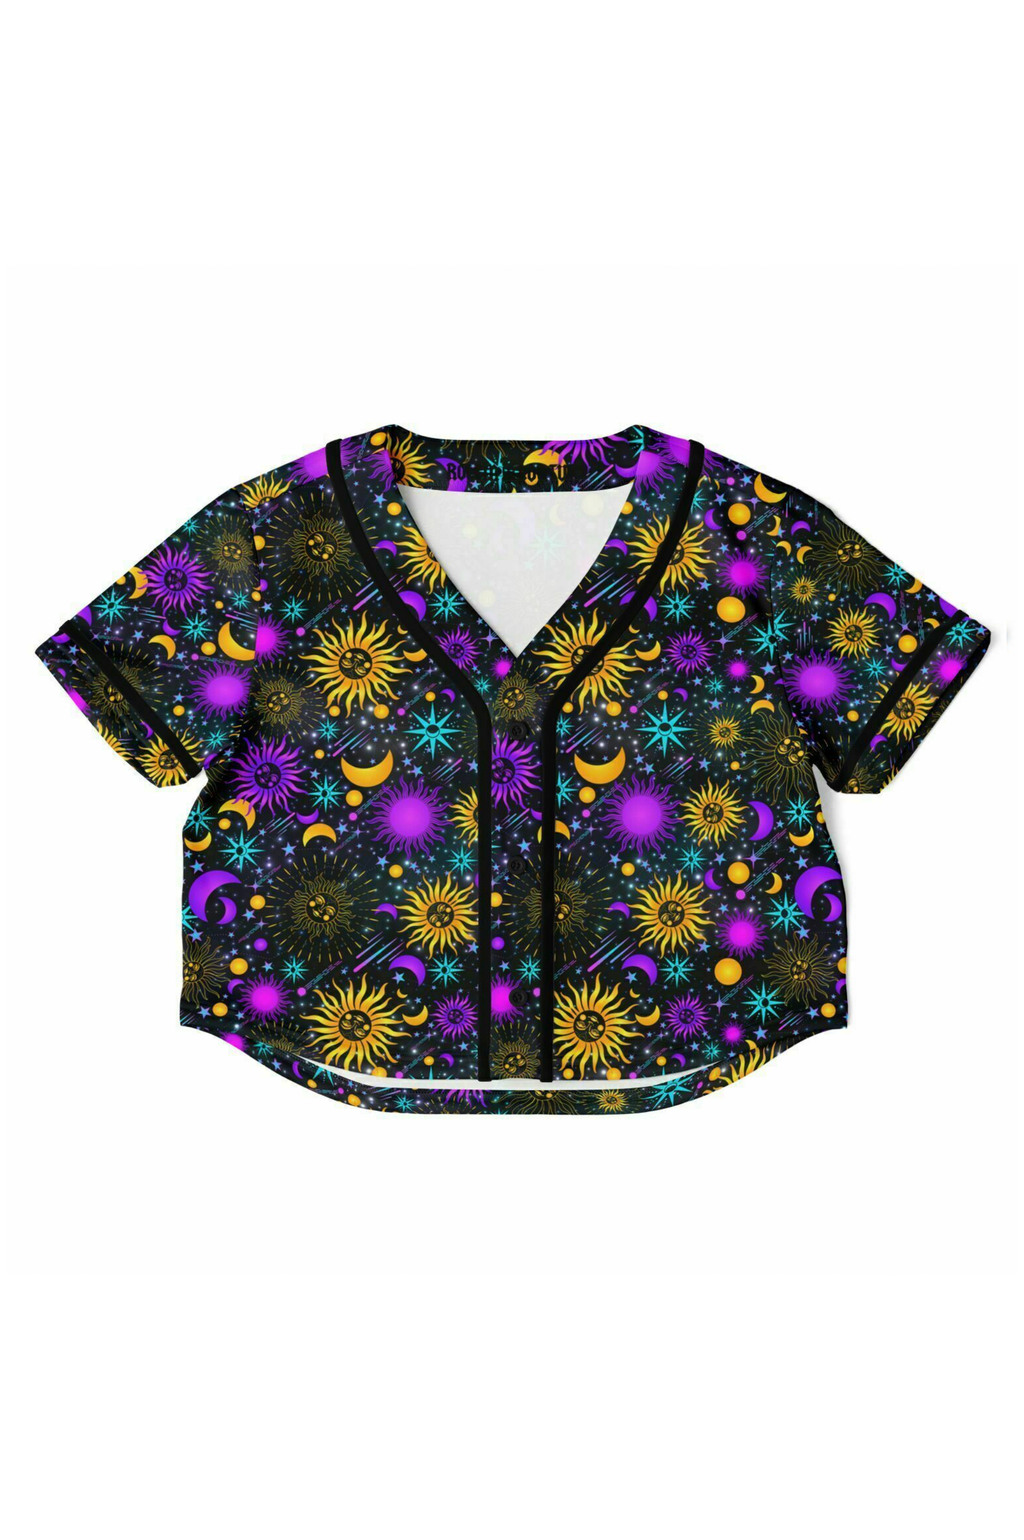 Third Eye Jersey (Made to Order) - Celestial Soul